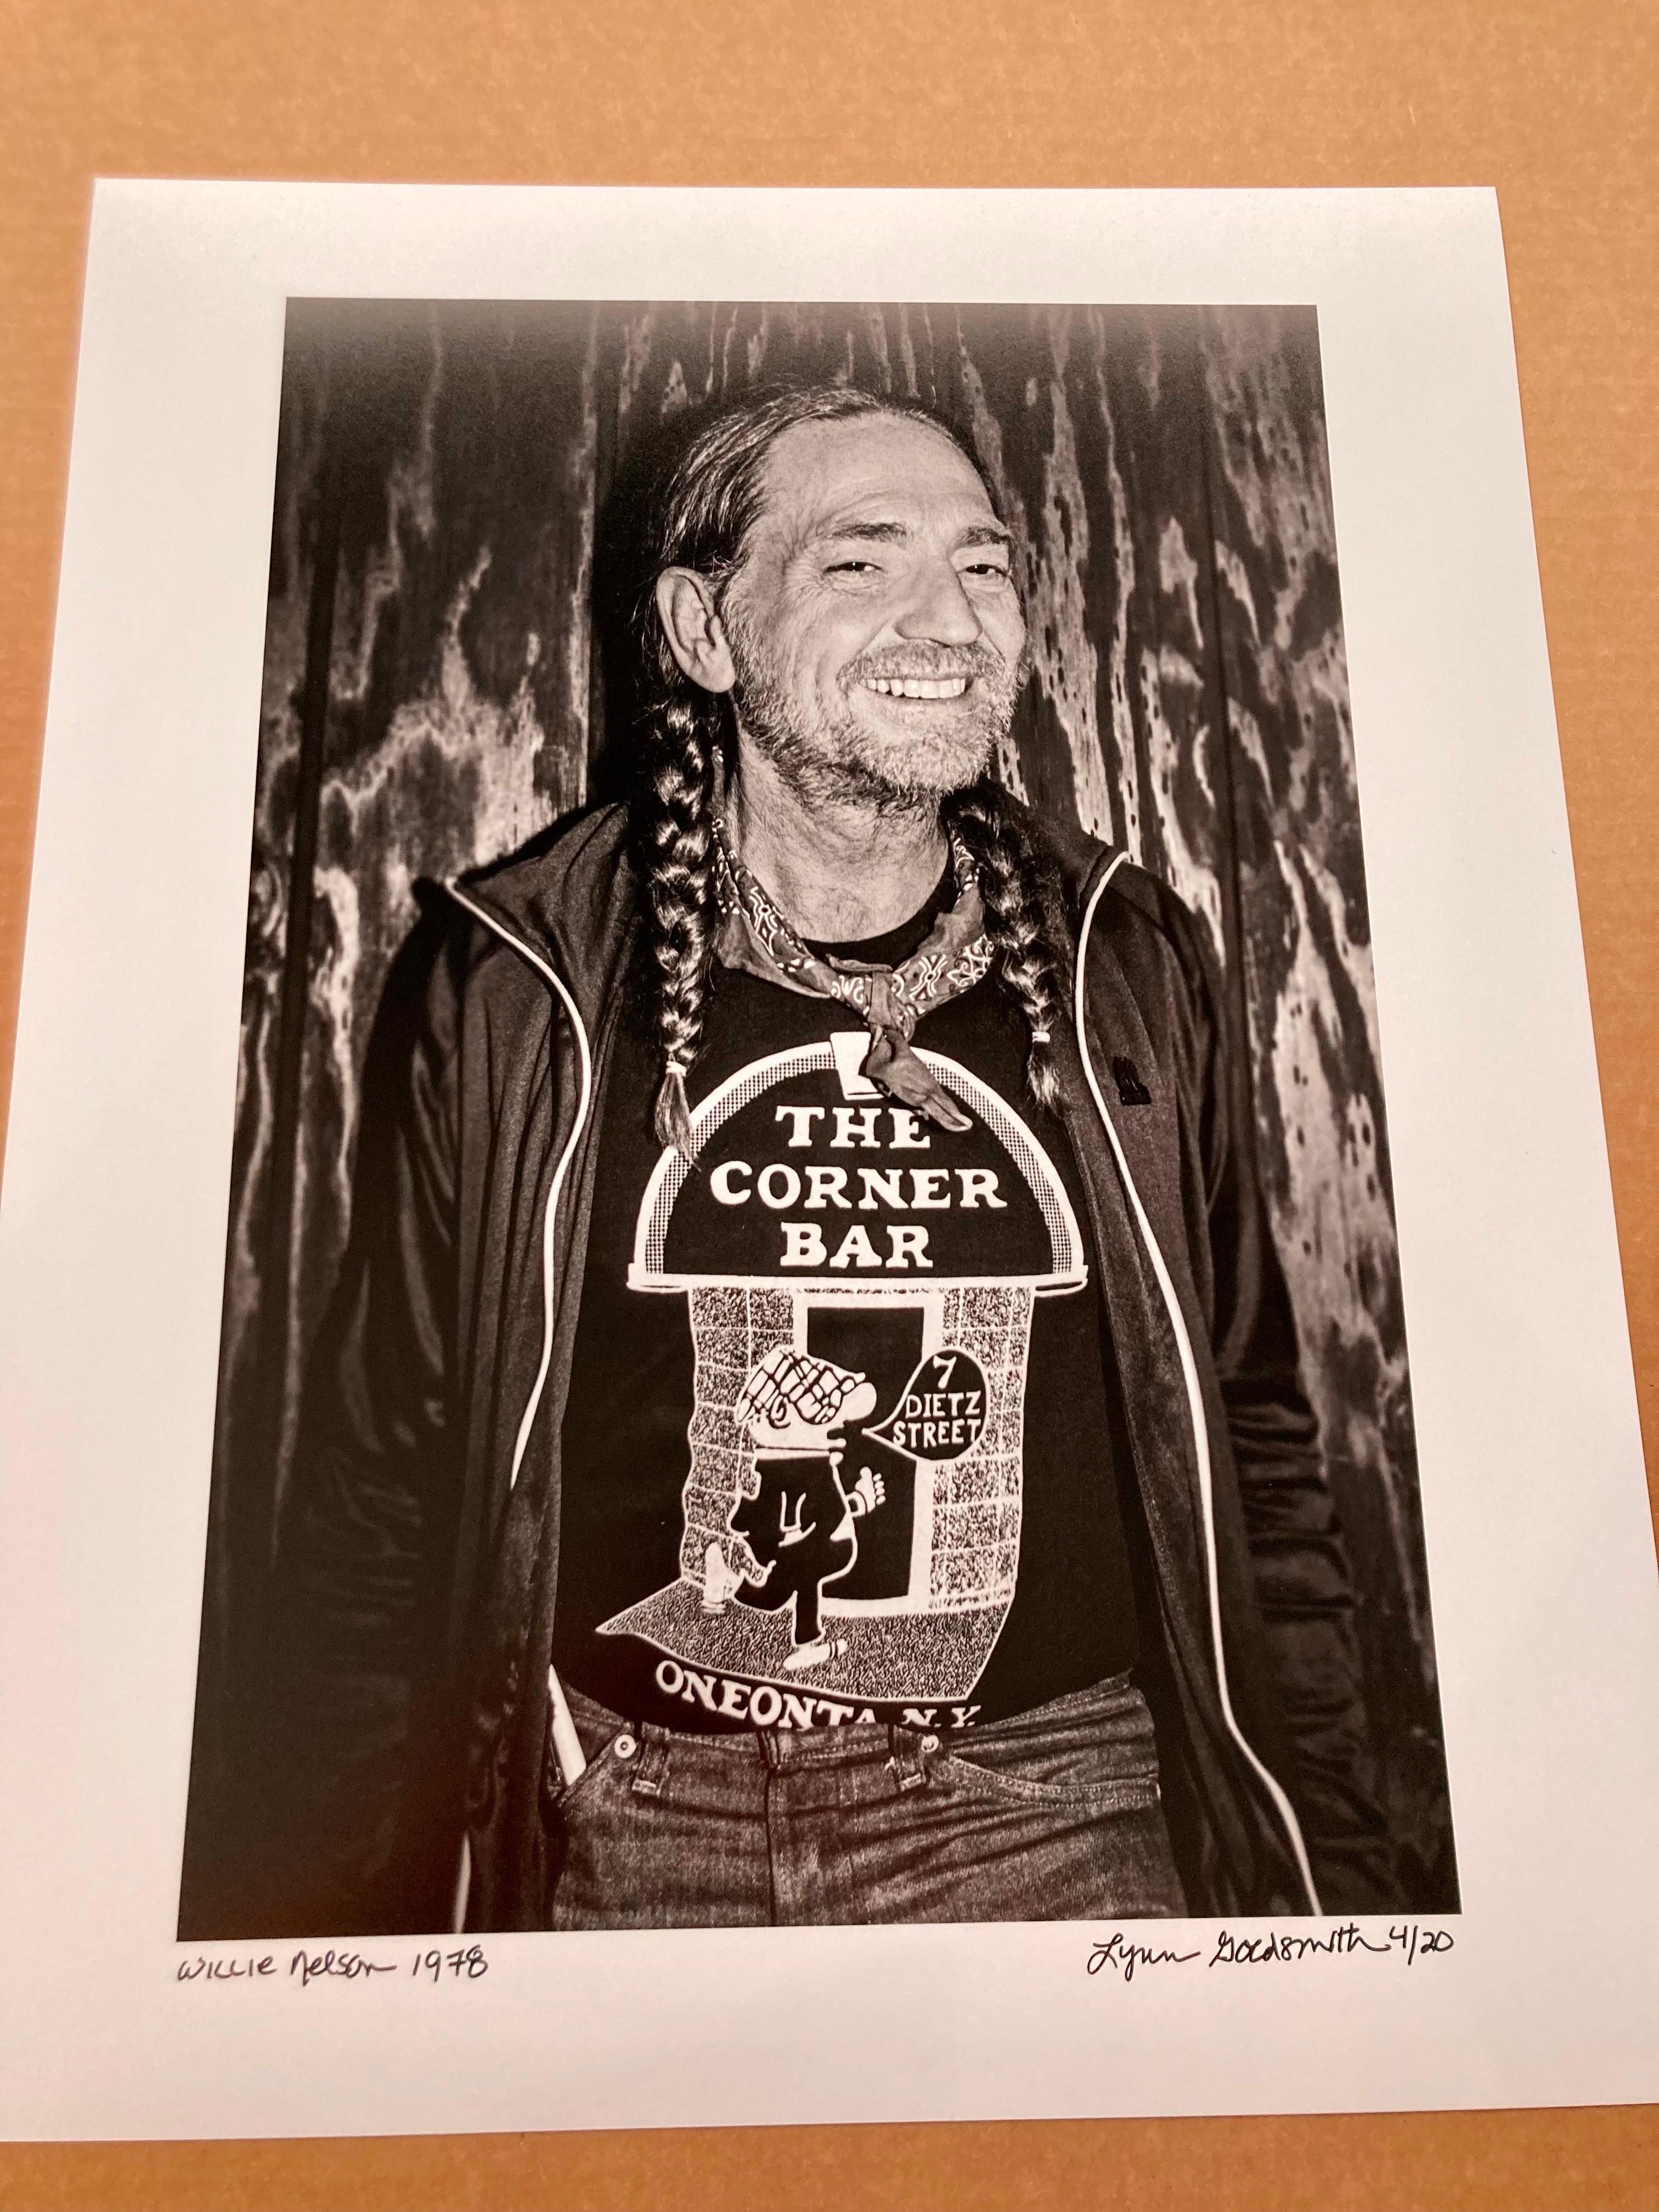 Willie Nelson portrait by Lynn Goldsmith signed limited edition 16x20